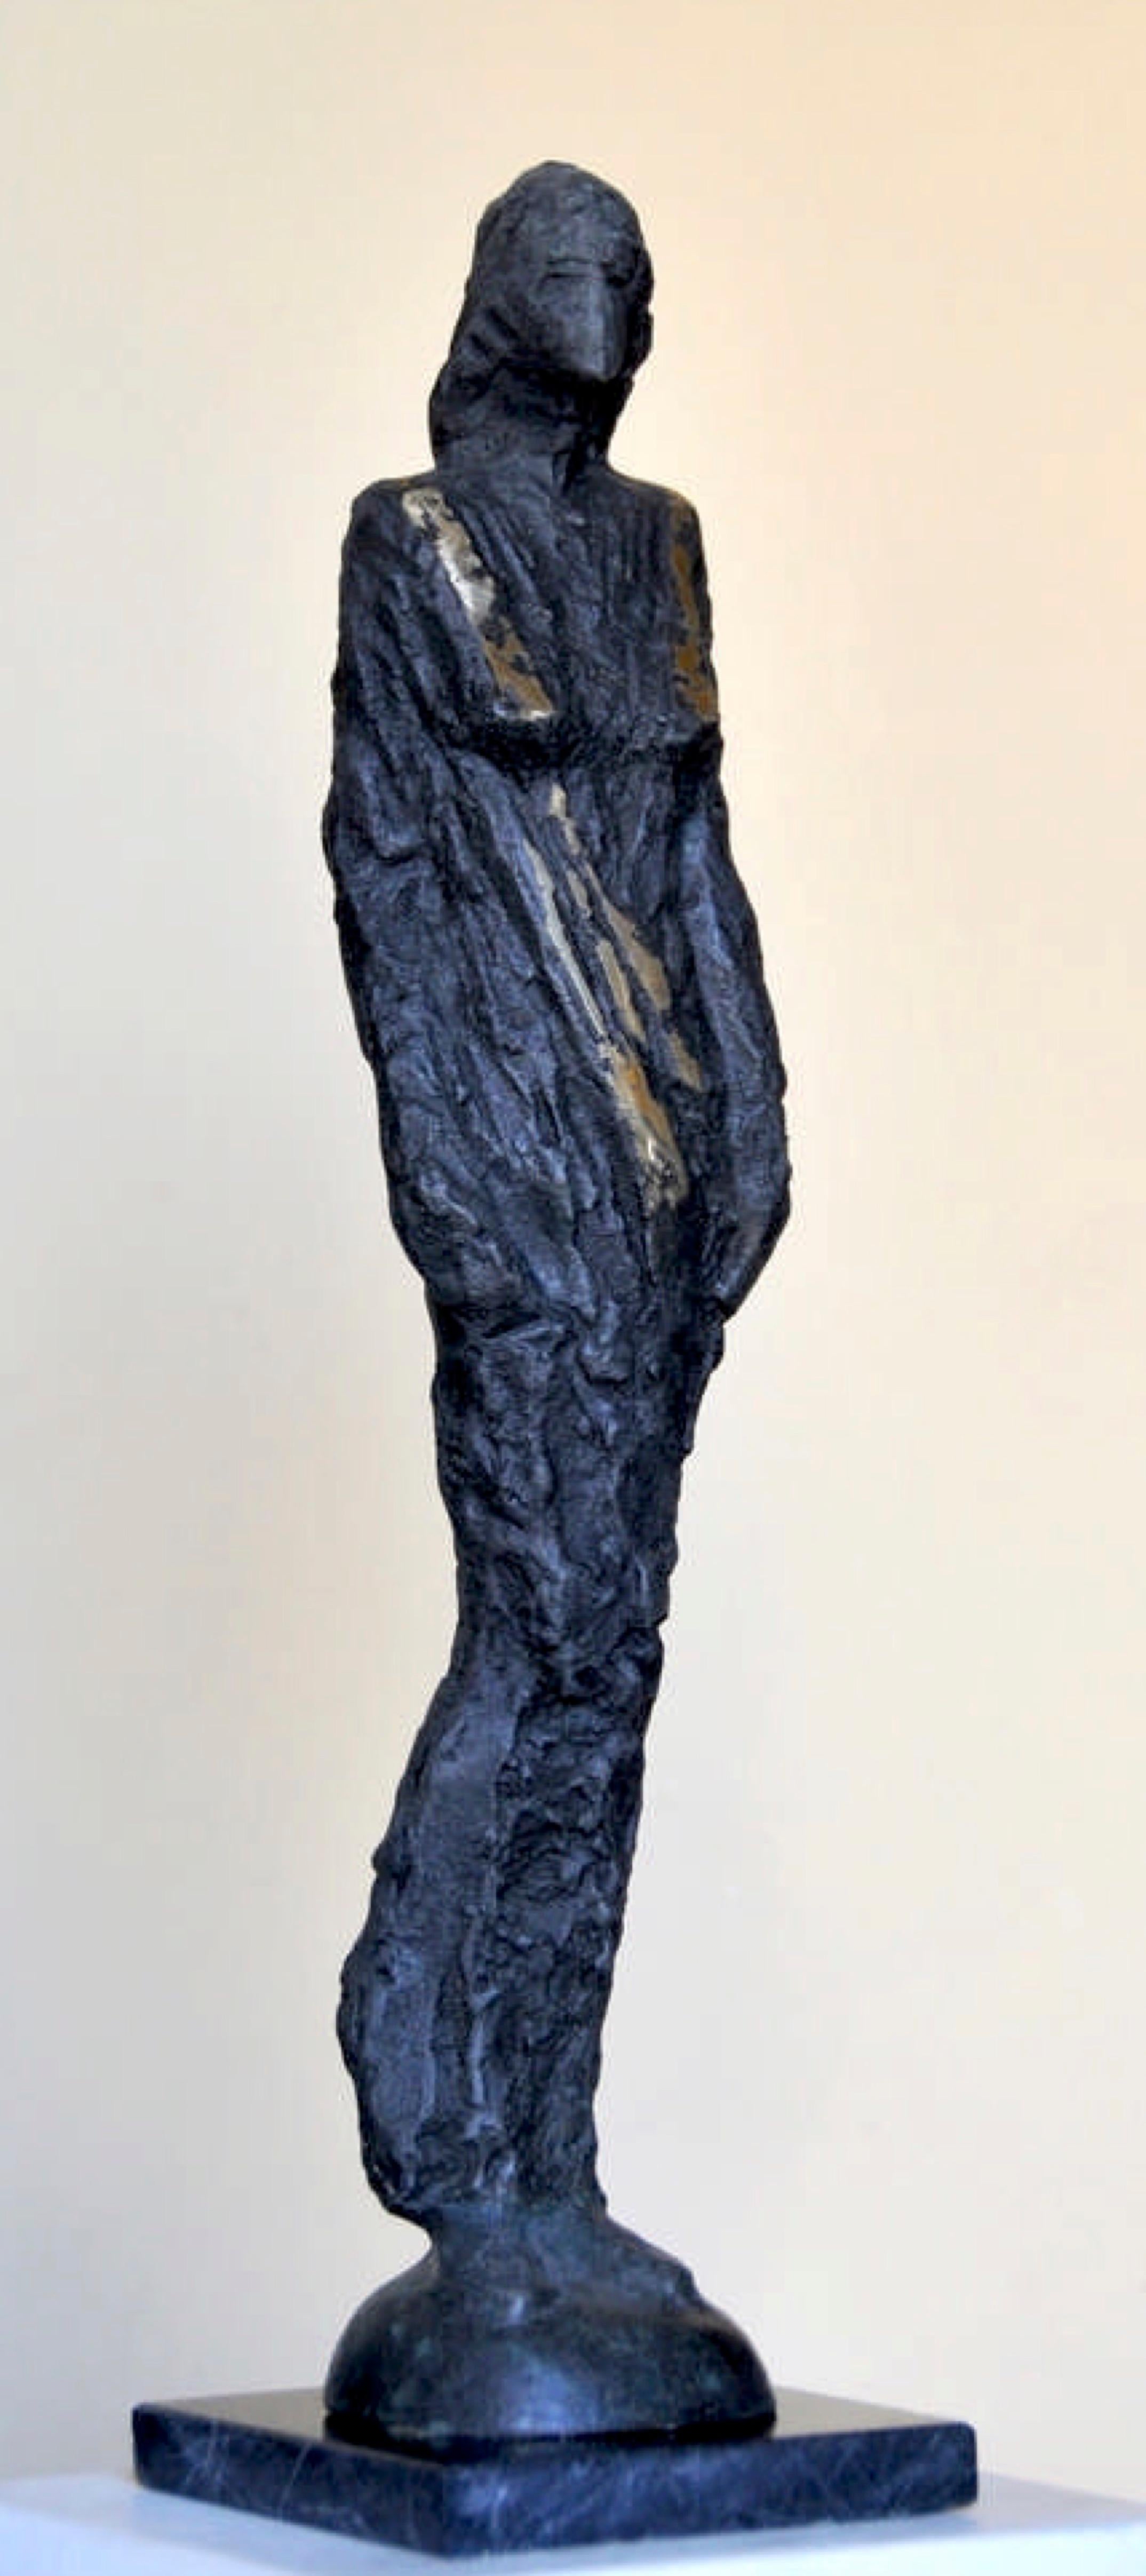 "Baroness" Bronze Sculpture 20" x 4" x 3" inch by Sarkis Tossonian	

* Due to the Ministry of Culture policy, handling time (paperwork) may take up to 2-3 weeks. 

Sarkis Tossoonian was born in Alexandria in 1953. He graduated from the Faculty of